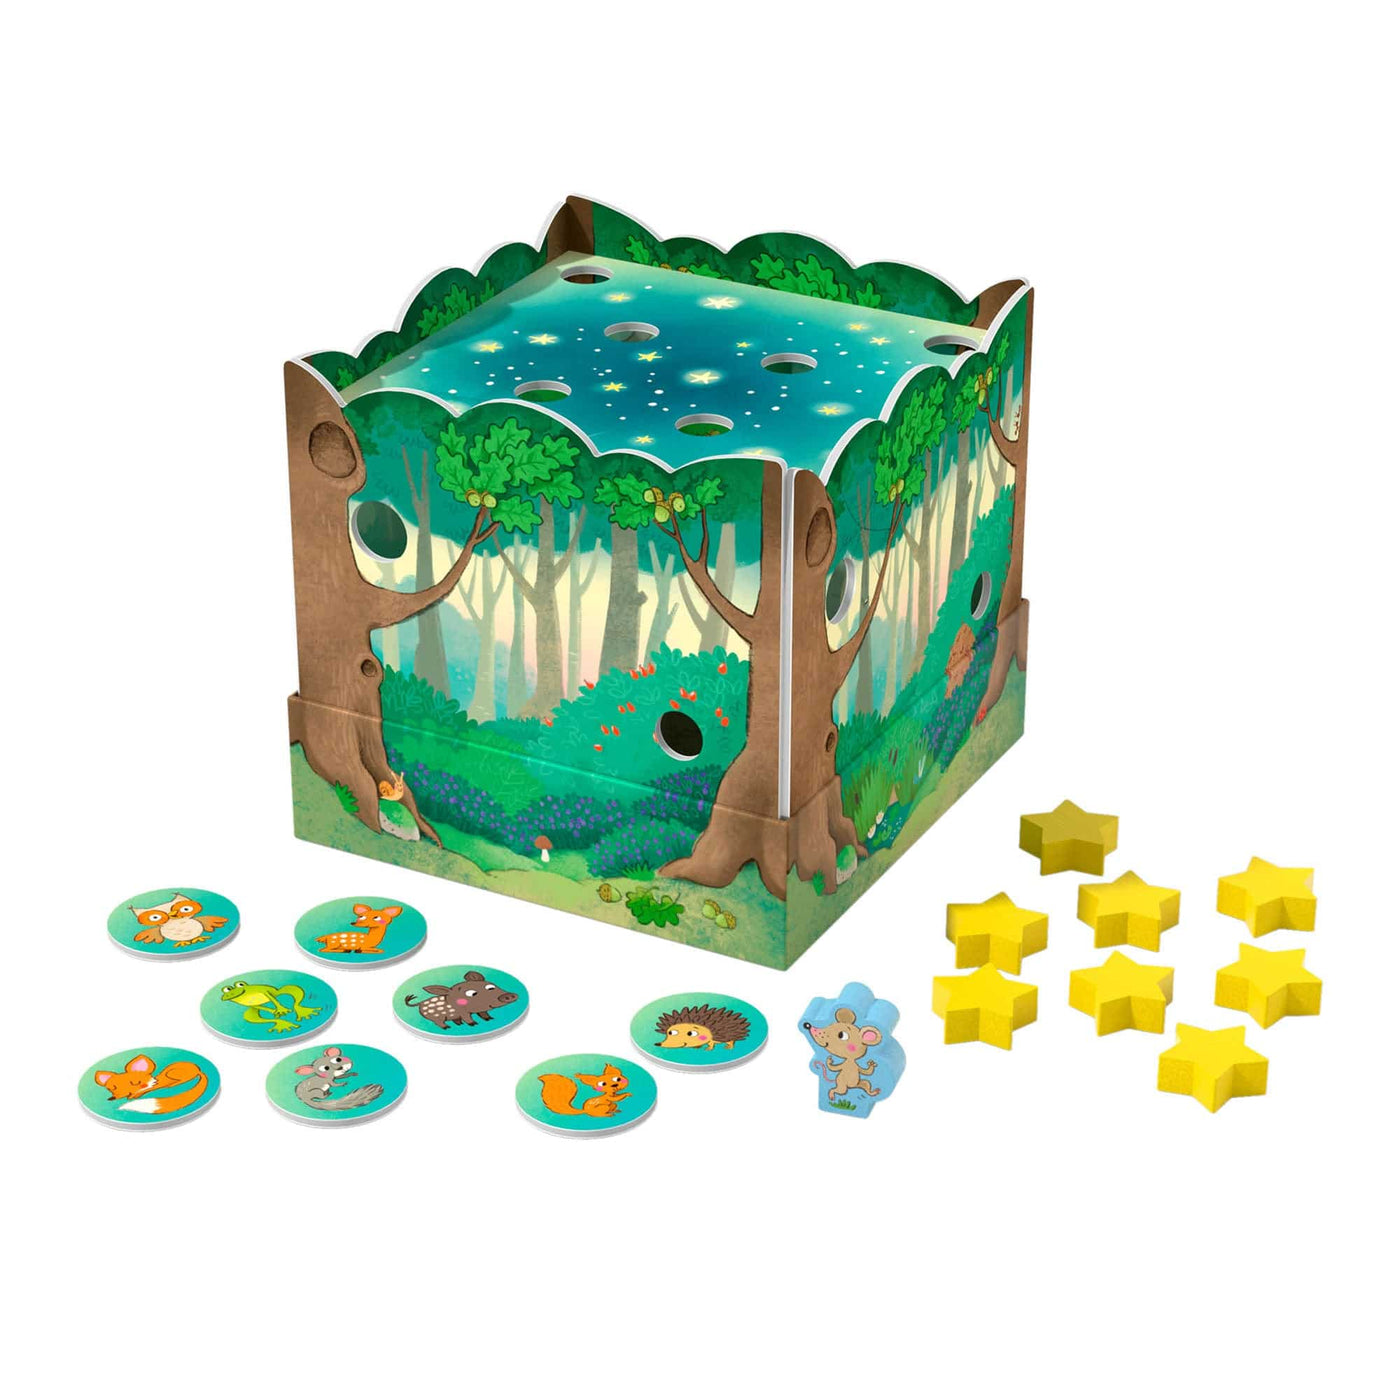 MVFG Forest Friends - HABA USA